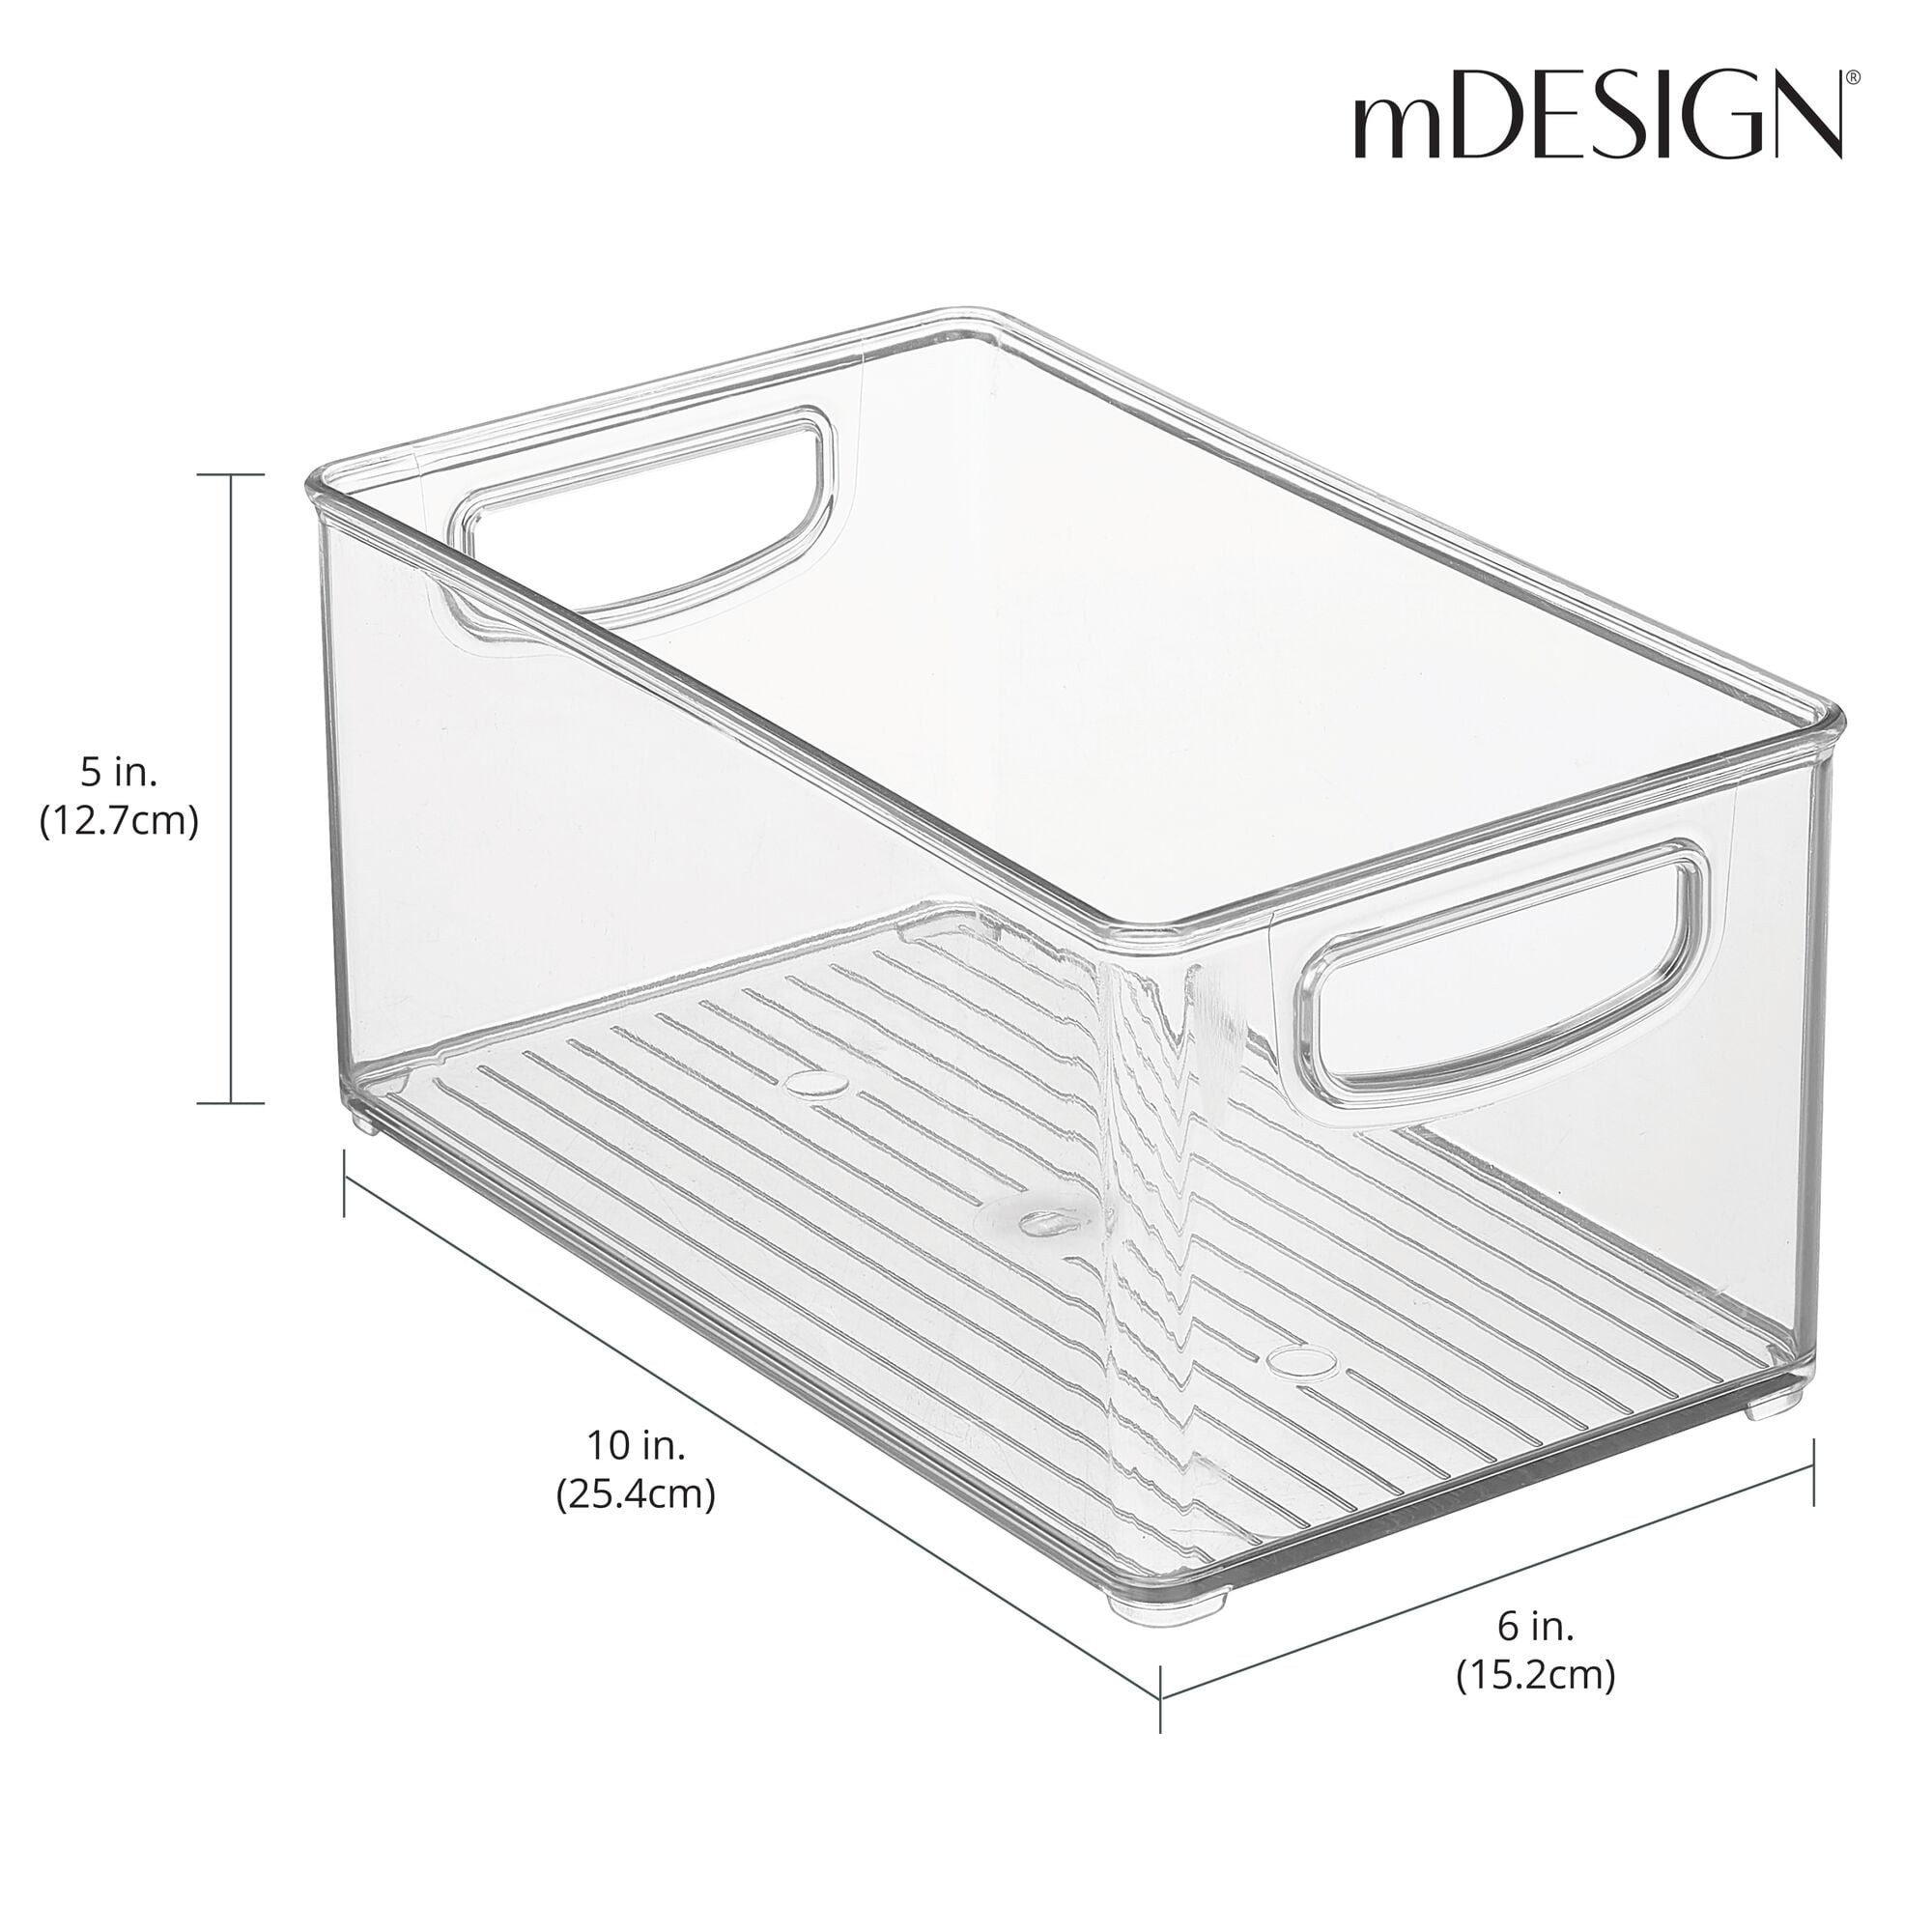  mDesign Plastic Stackable Kitchen Pantry Cabinet, Food Storage  Bin Box with Handles, Lid - Organizer for Packets, Jars, Snacks, Pasta - 4  Pack - Clear/Bamboo Lid: Home & Kitchen